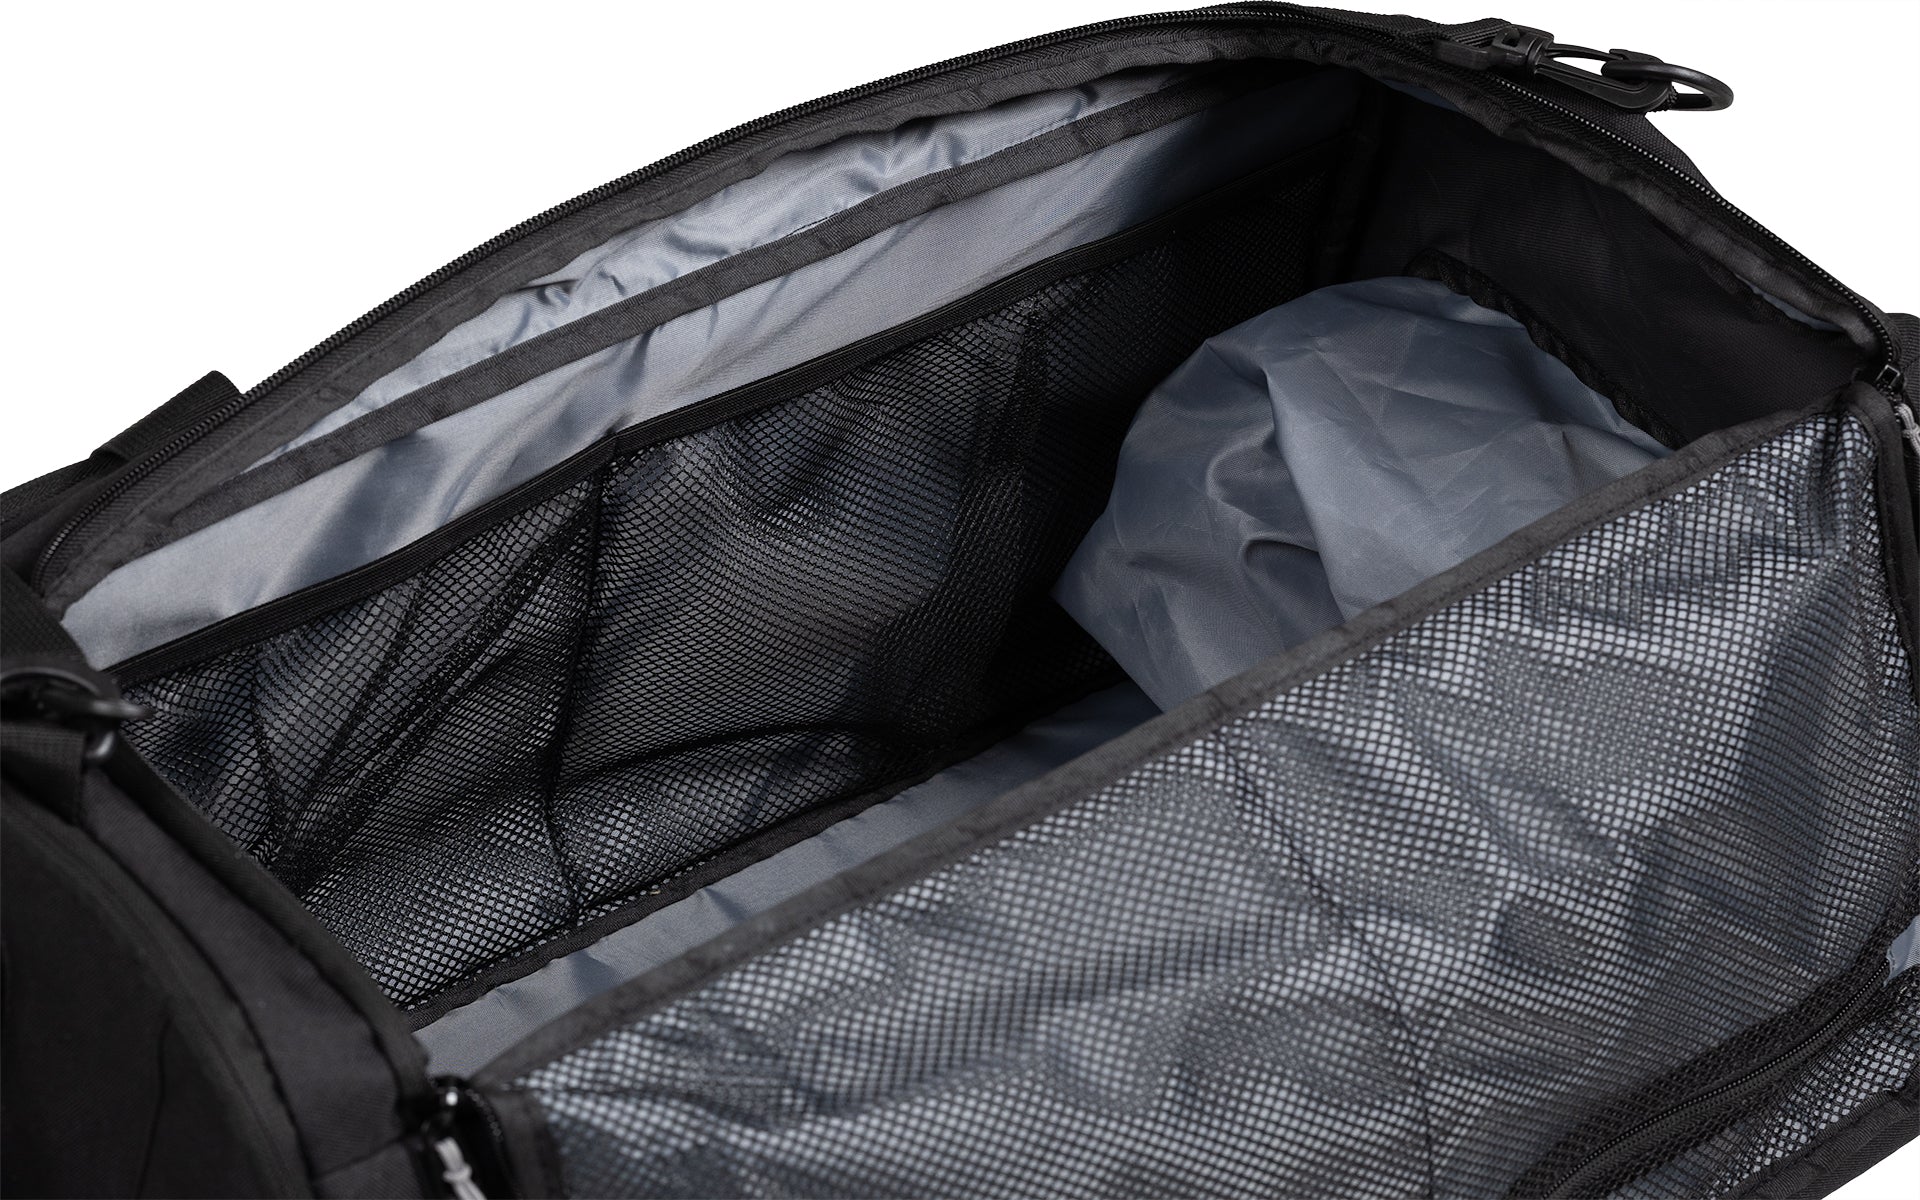 View of different mesh compartments on the inside of the Gym Bag